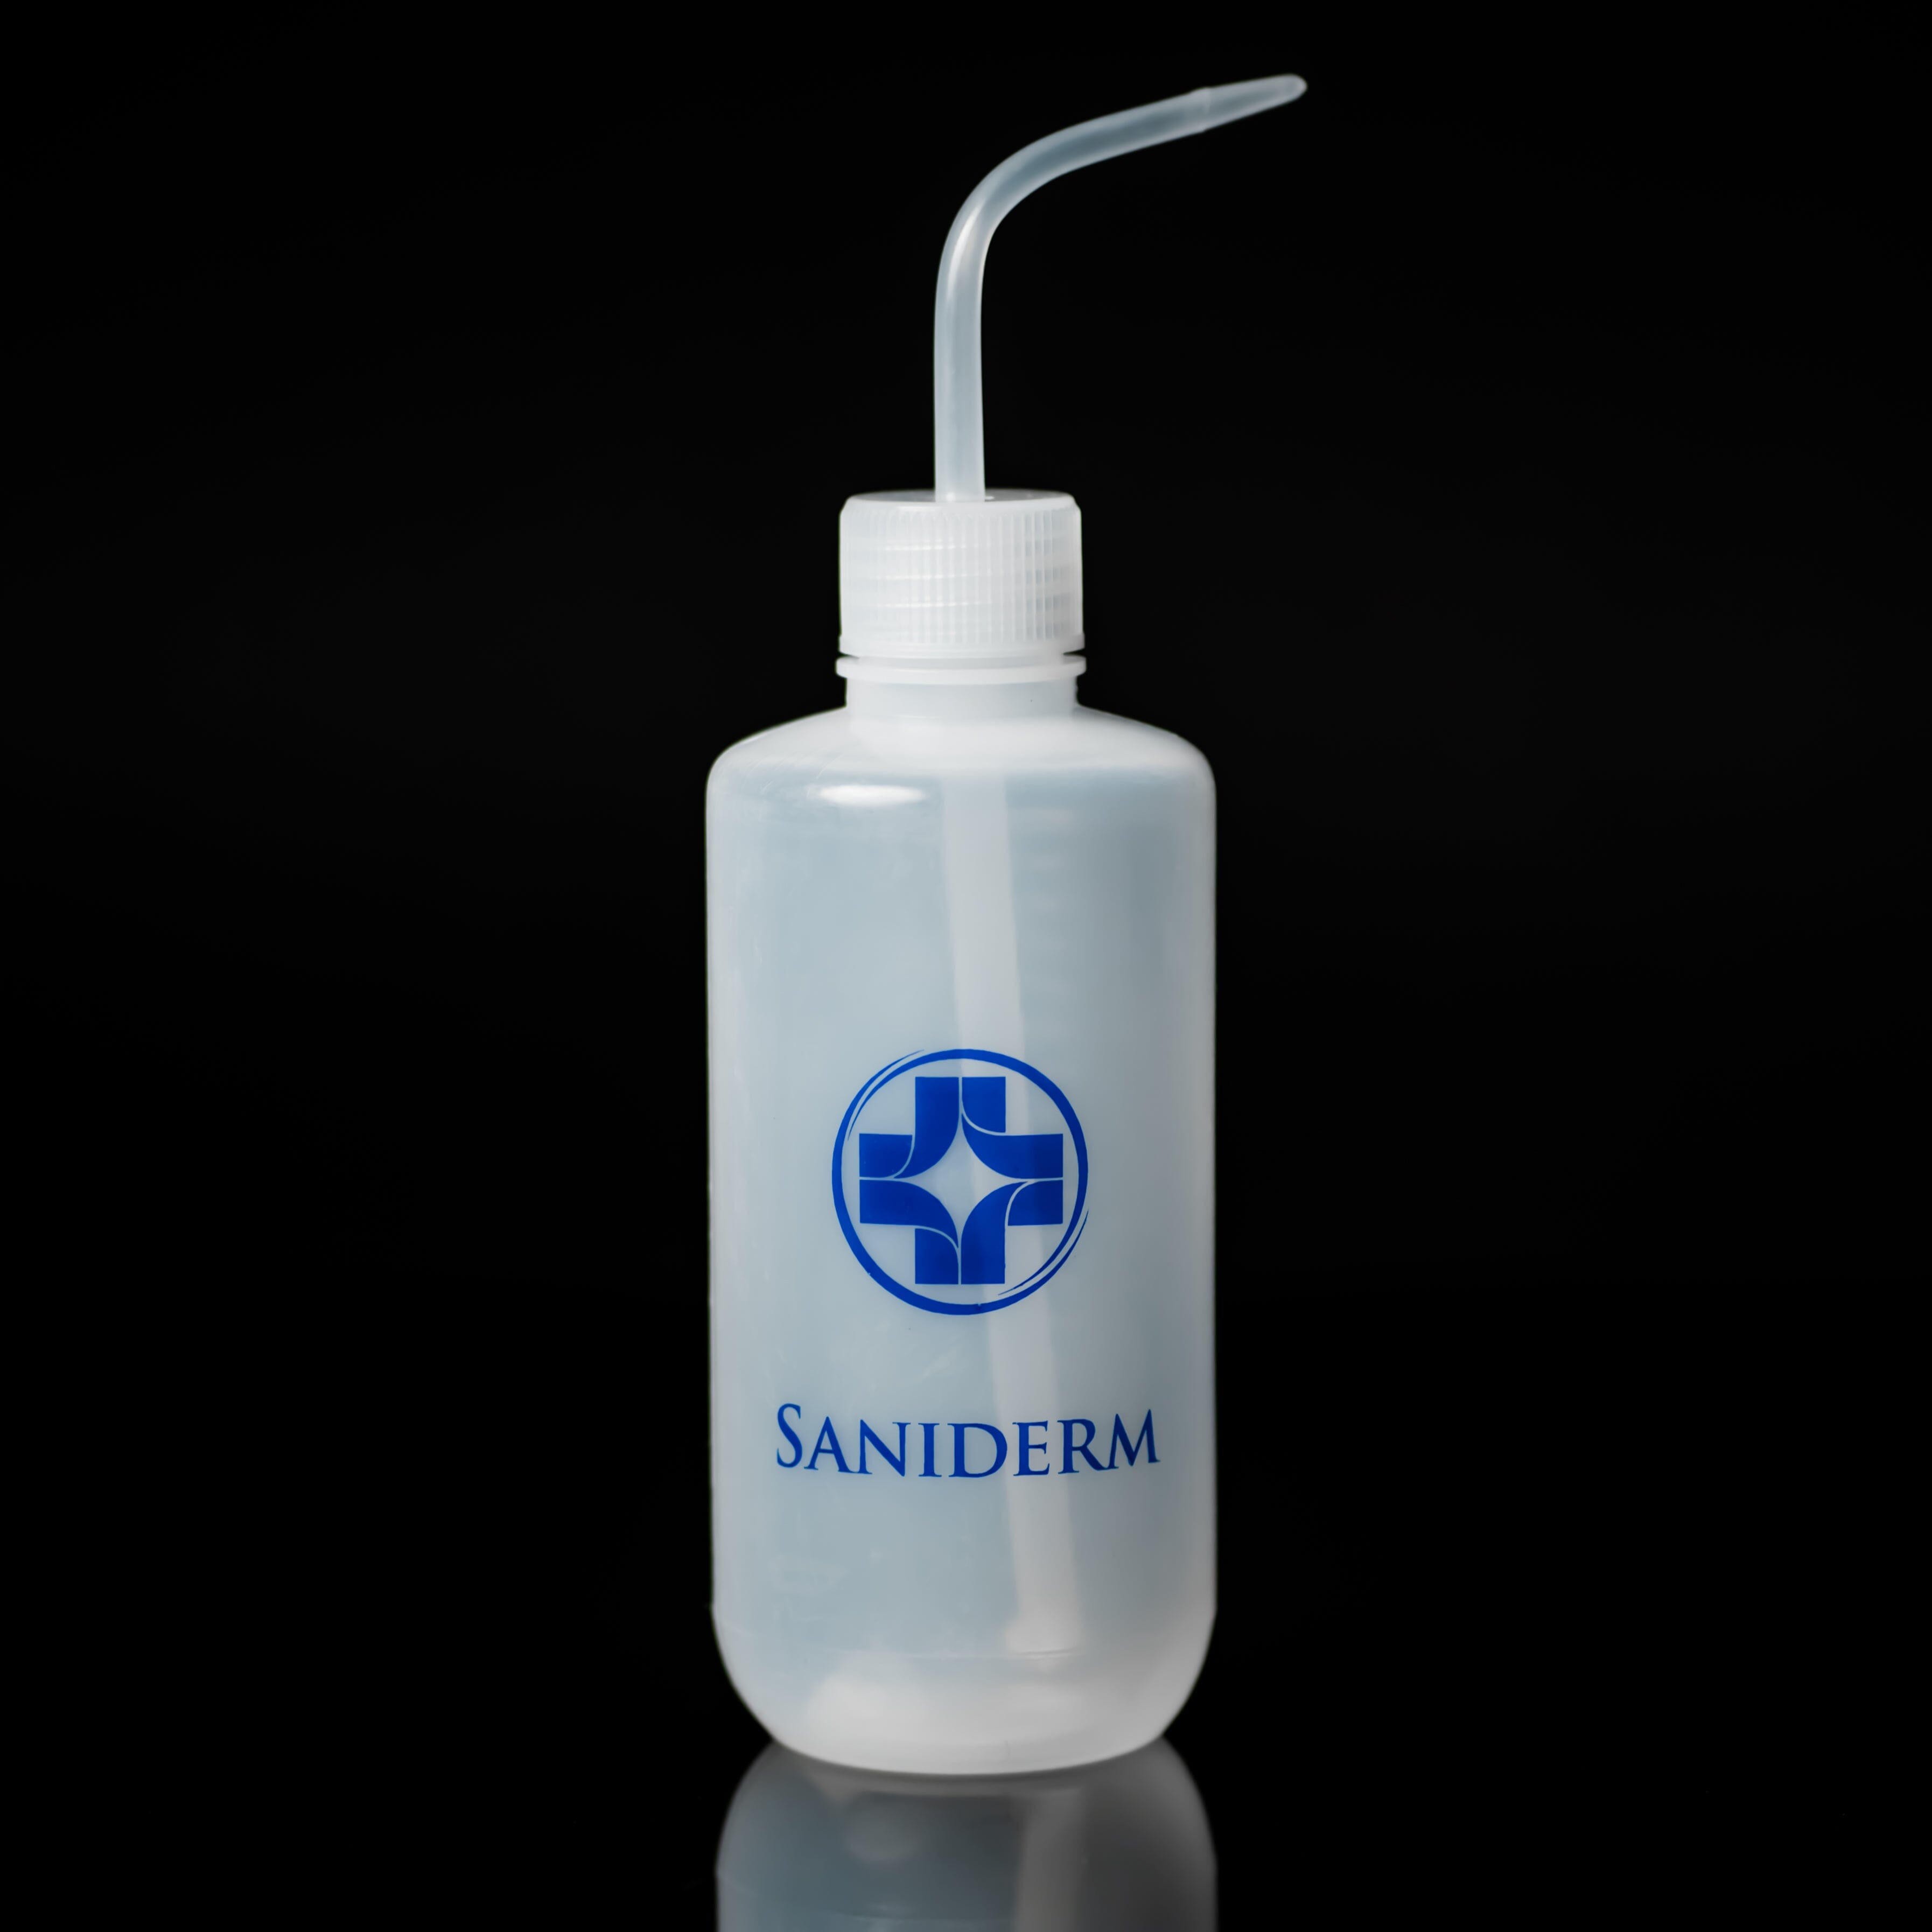 Saniderm Squirt Bottle Miscellaneous Saniderm Tattoo Aftercare 